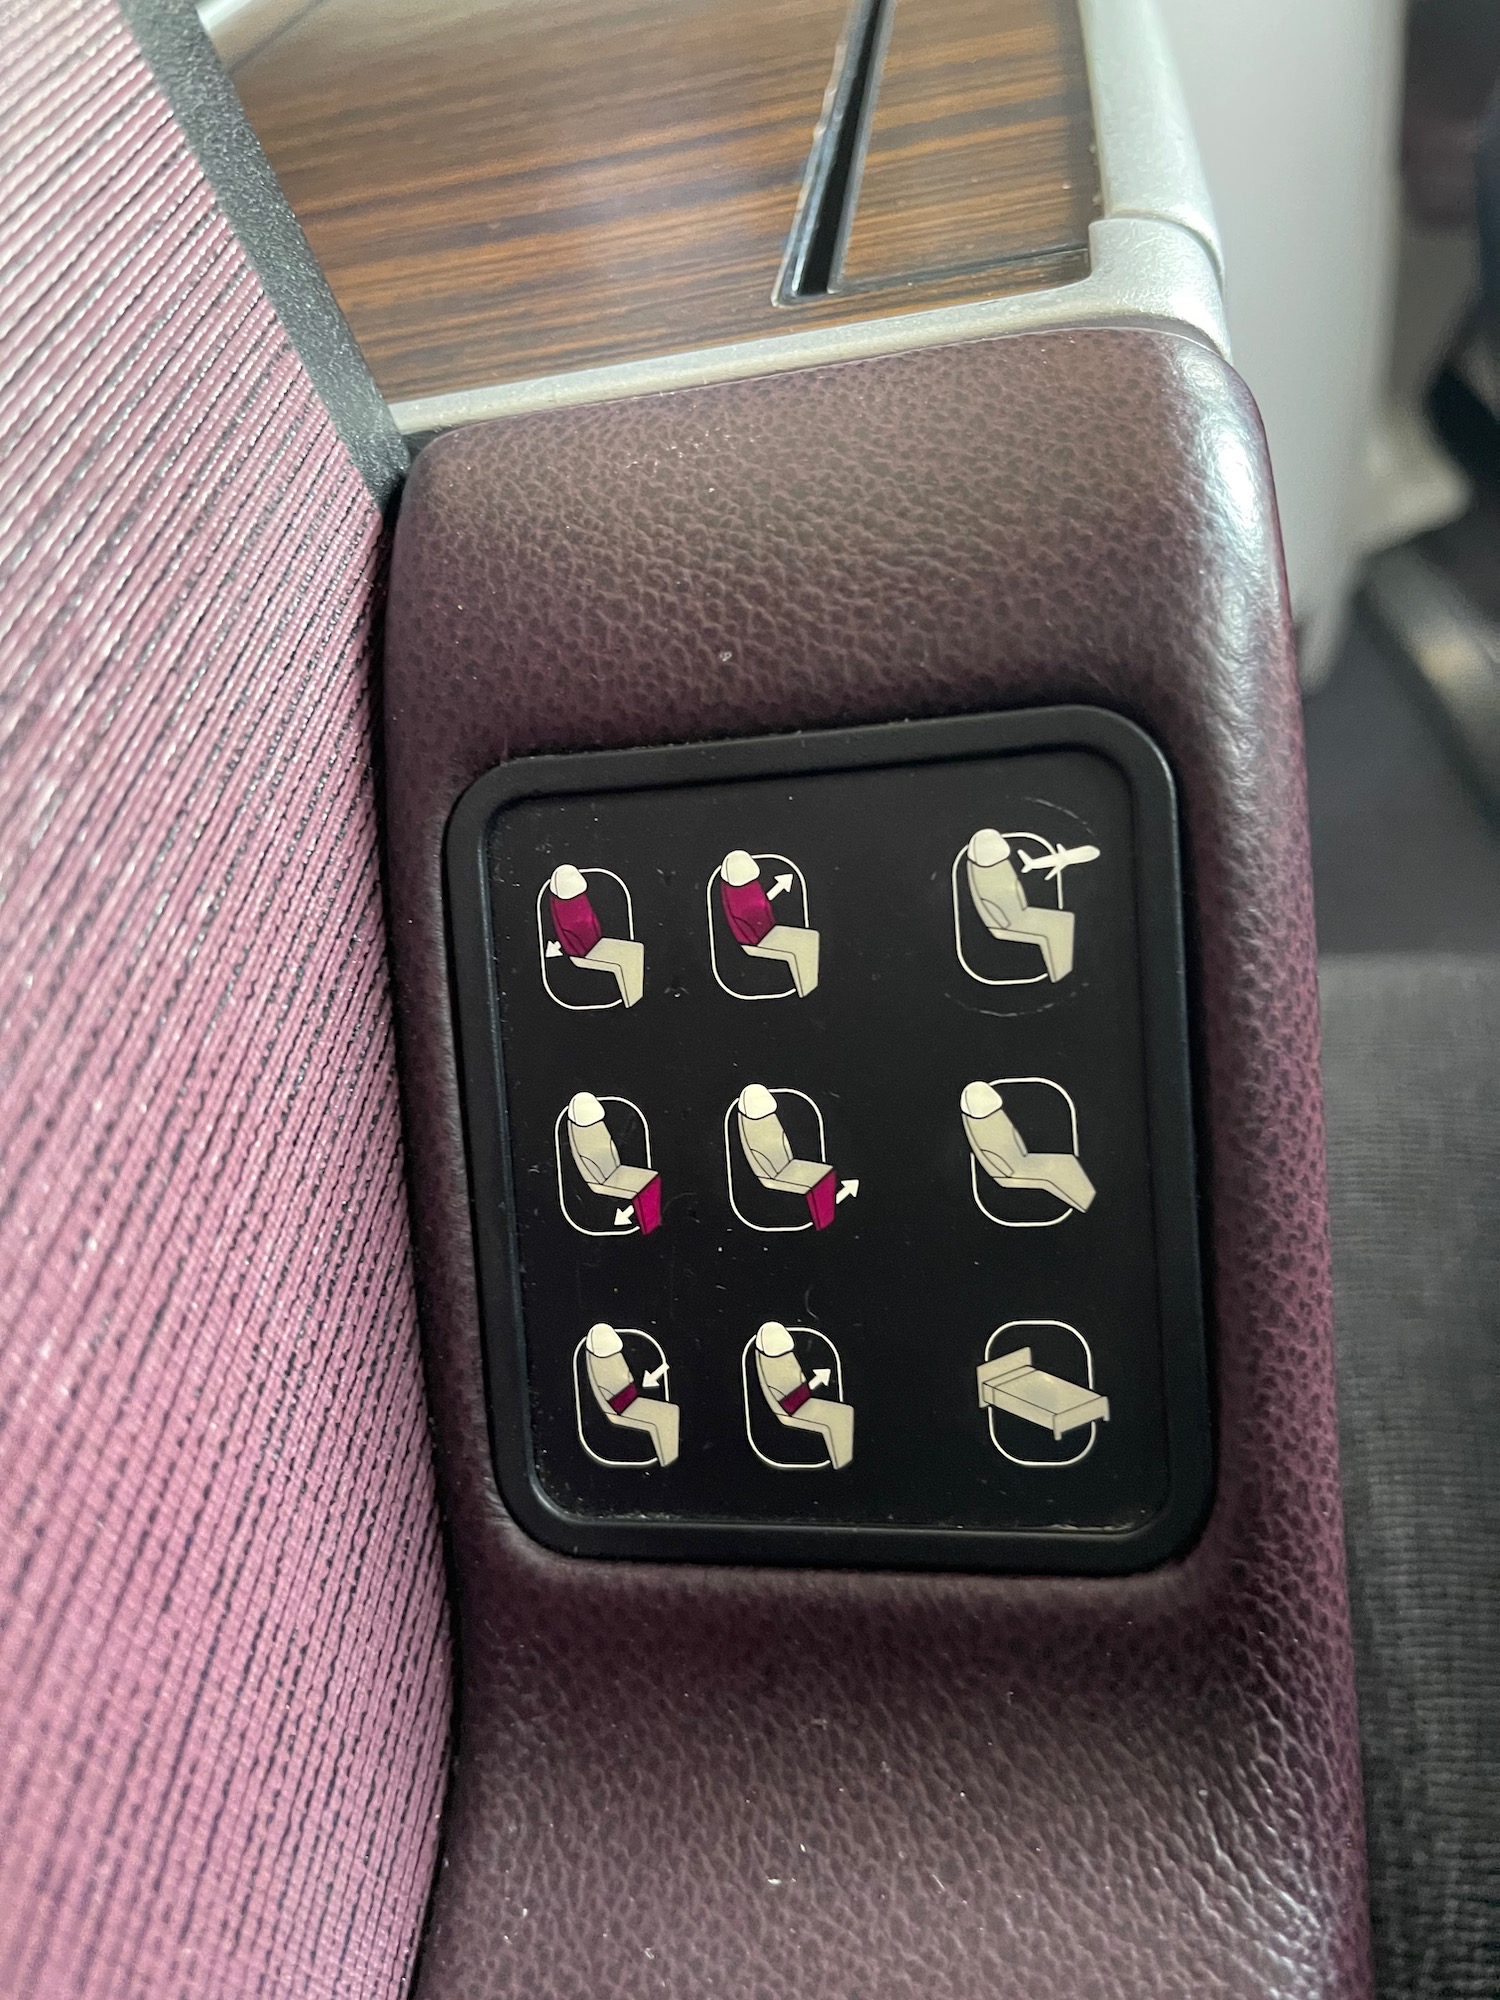 a seat control panel on a seat